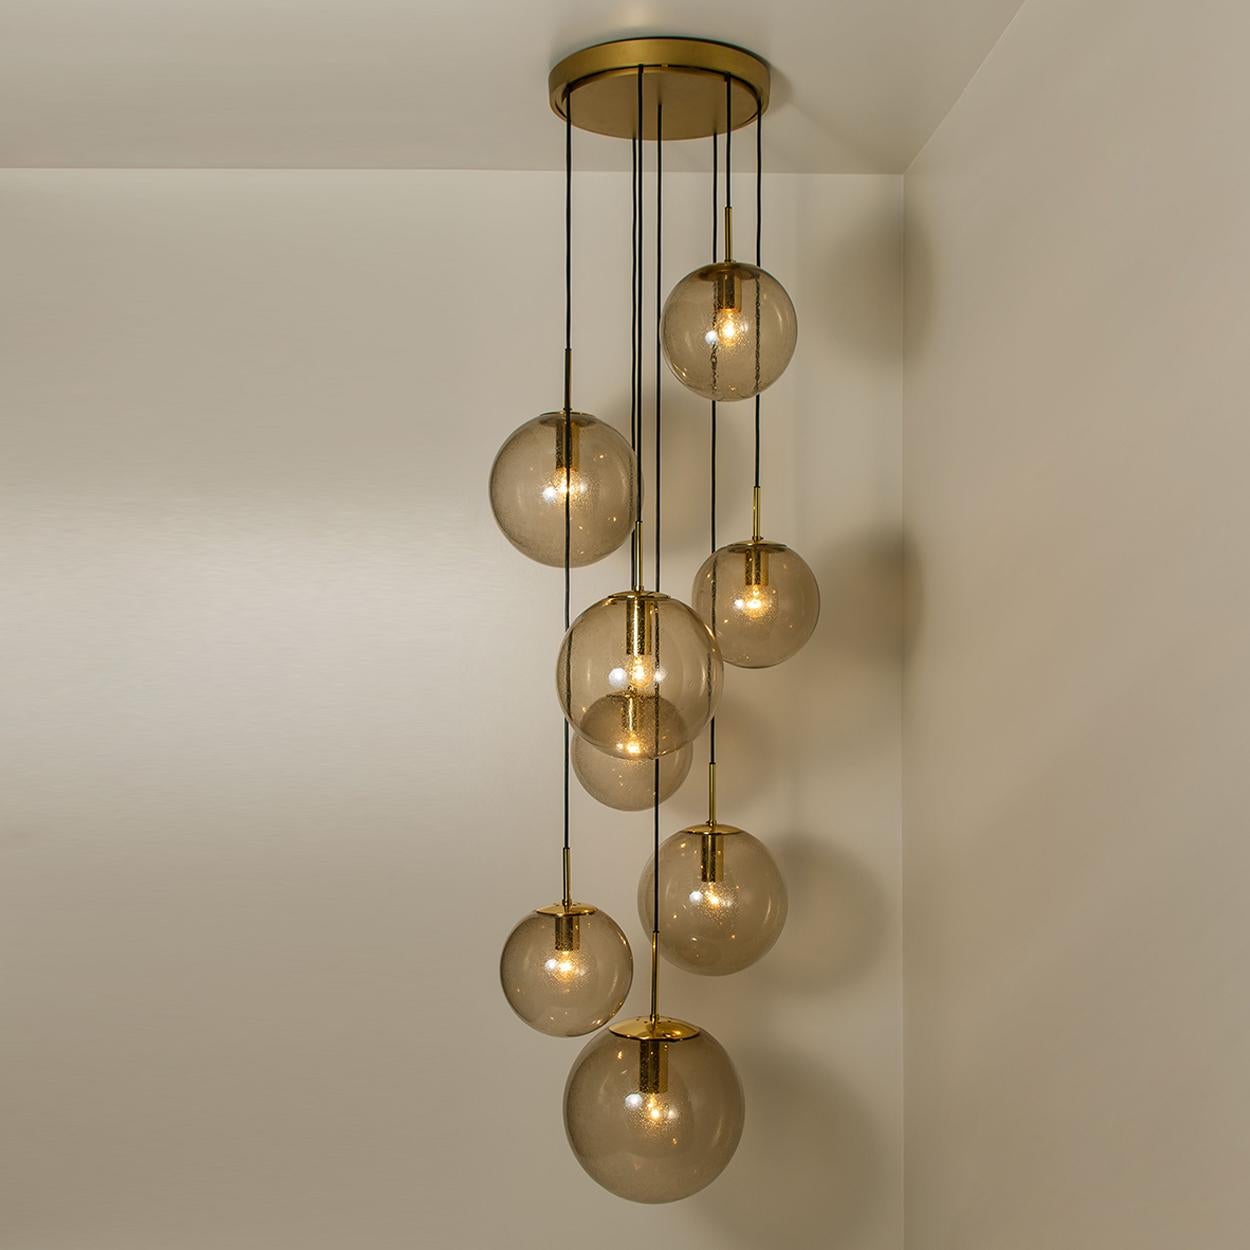 Absolutely amazing huge ceiling mount pendant light fixture with eight different sizes of globes or spheres by Limburg Glashütte. With hand blown smoked glass globes in 11.8